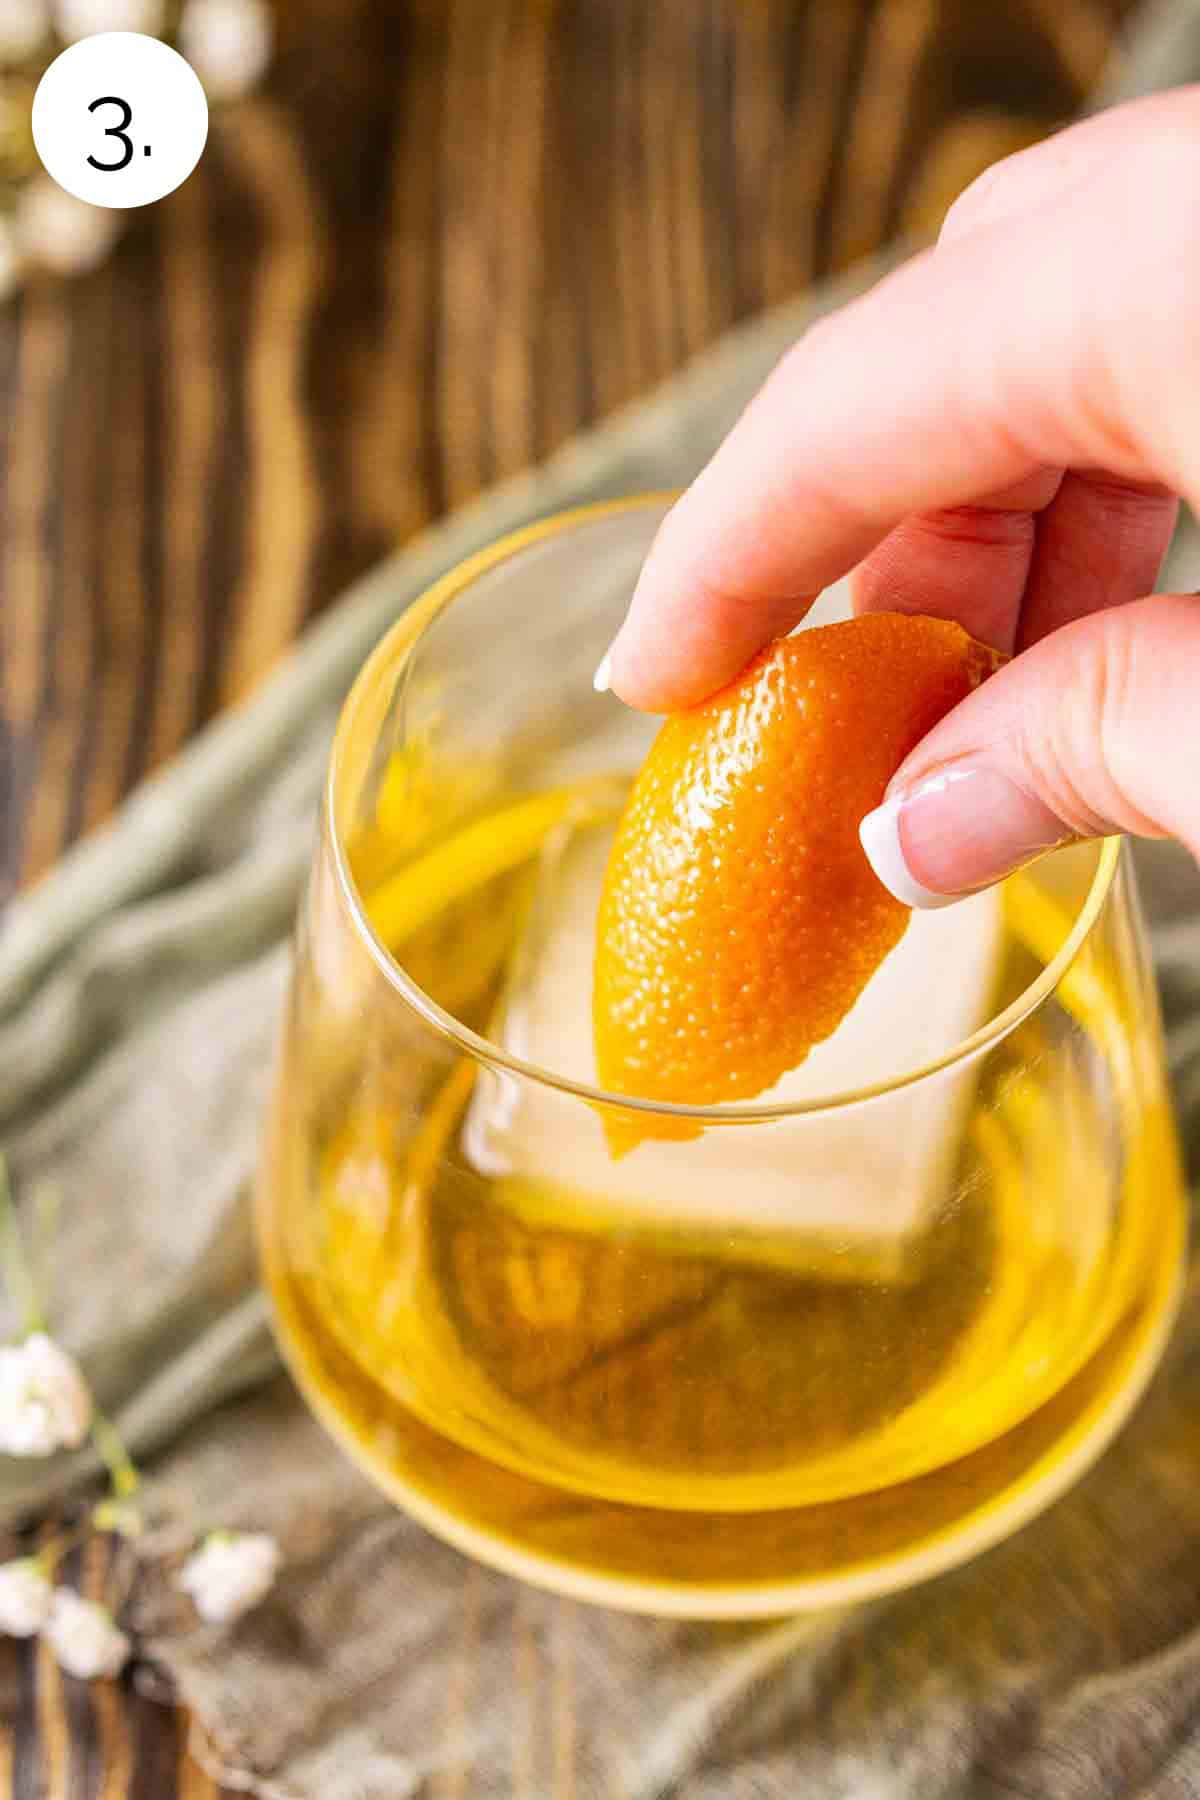 A hand adding an orange twist to the old fashioned glass to garnish after stirring and before serving.